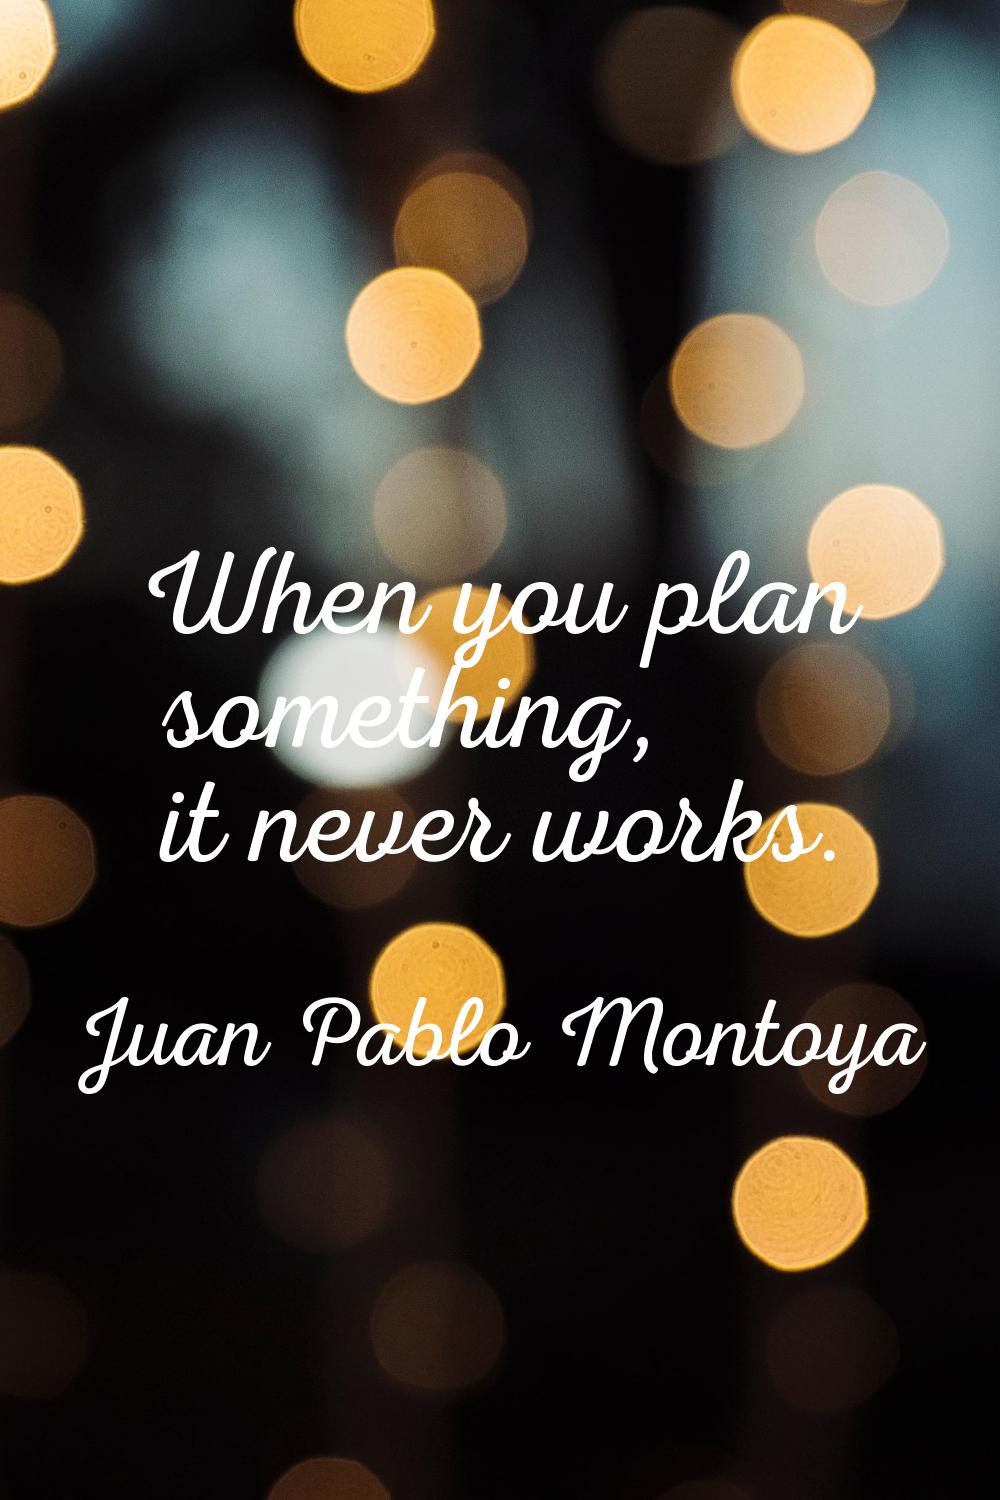 When you plan something, it never works.